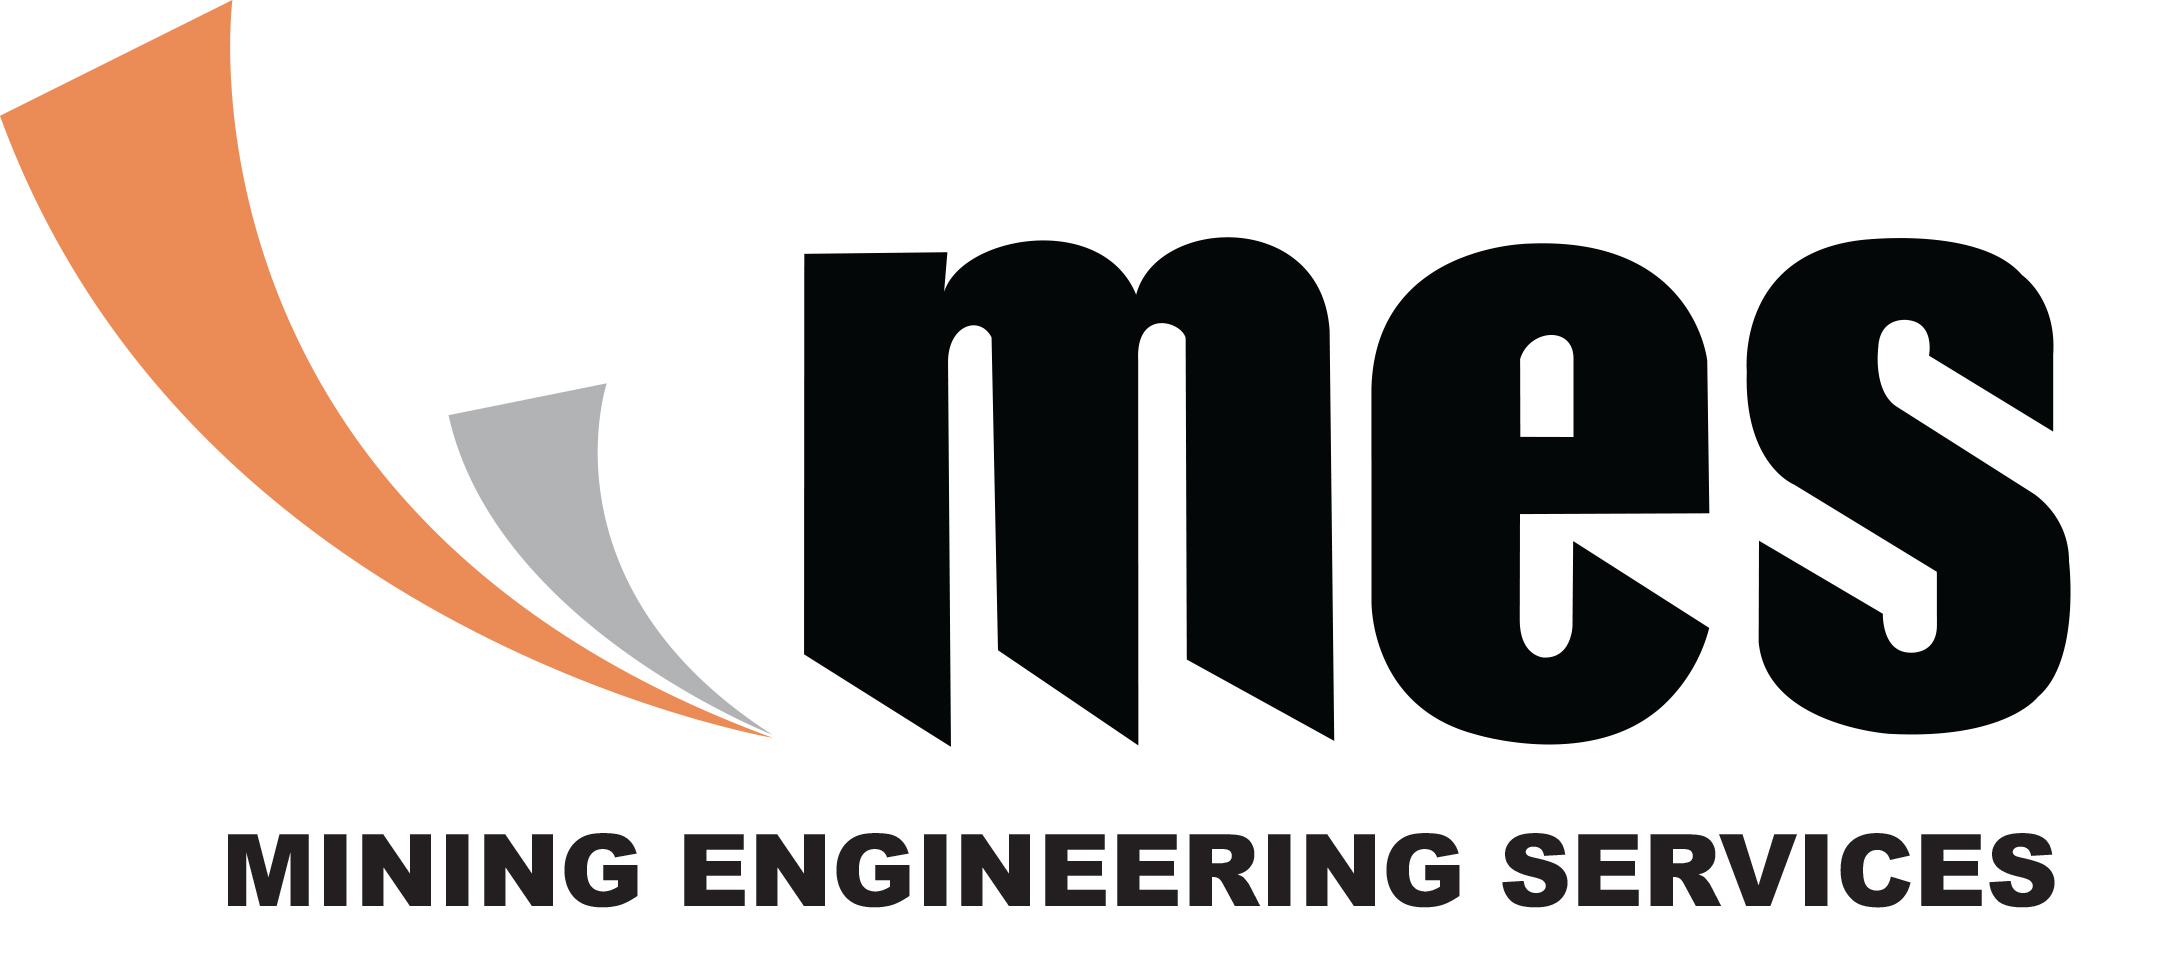 Mining Engineering Services (MES)